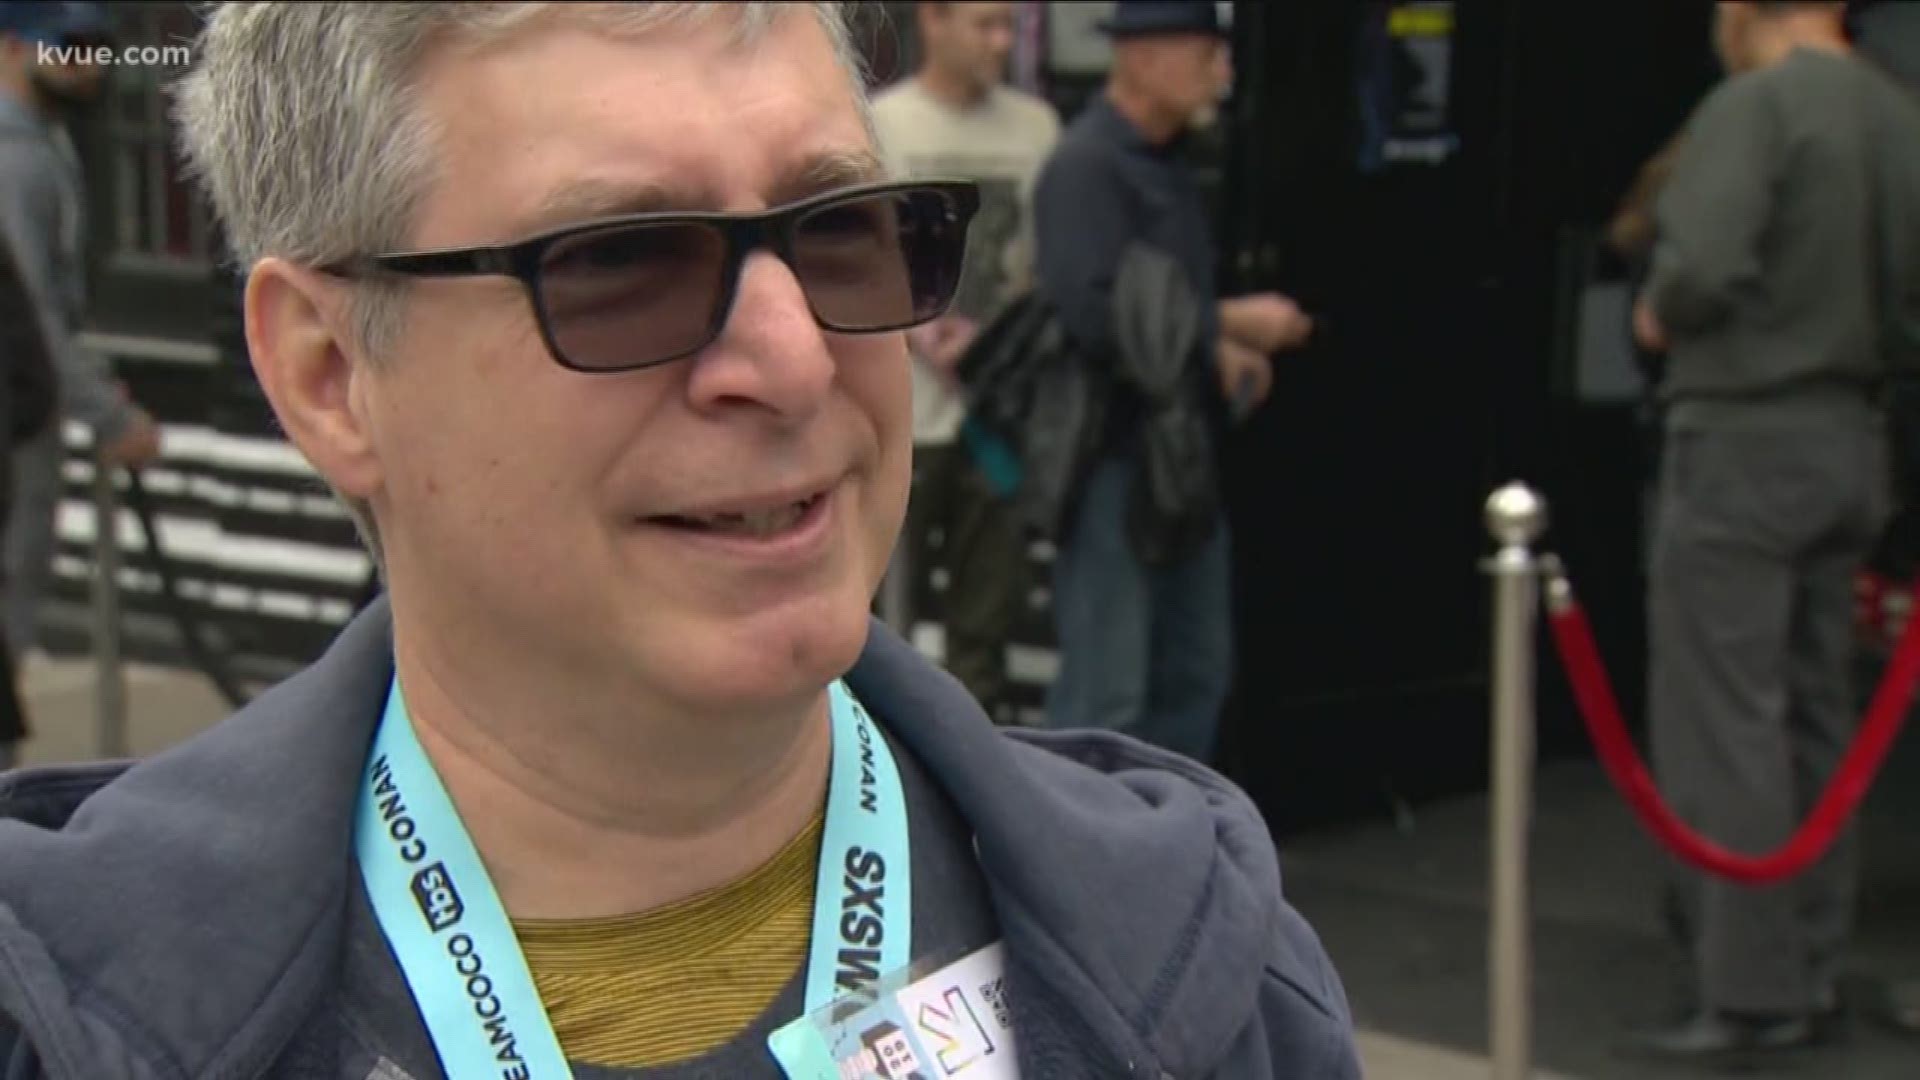 Donald Mason has been coming to SXSW for nearly 30 years.